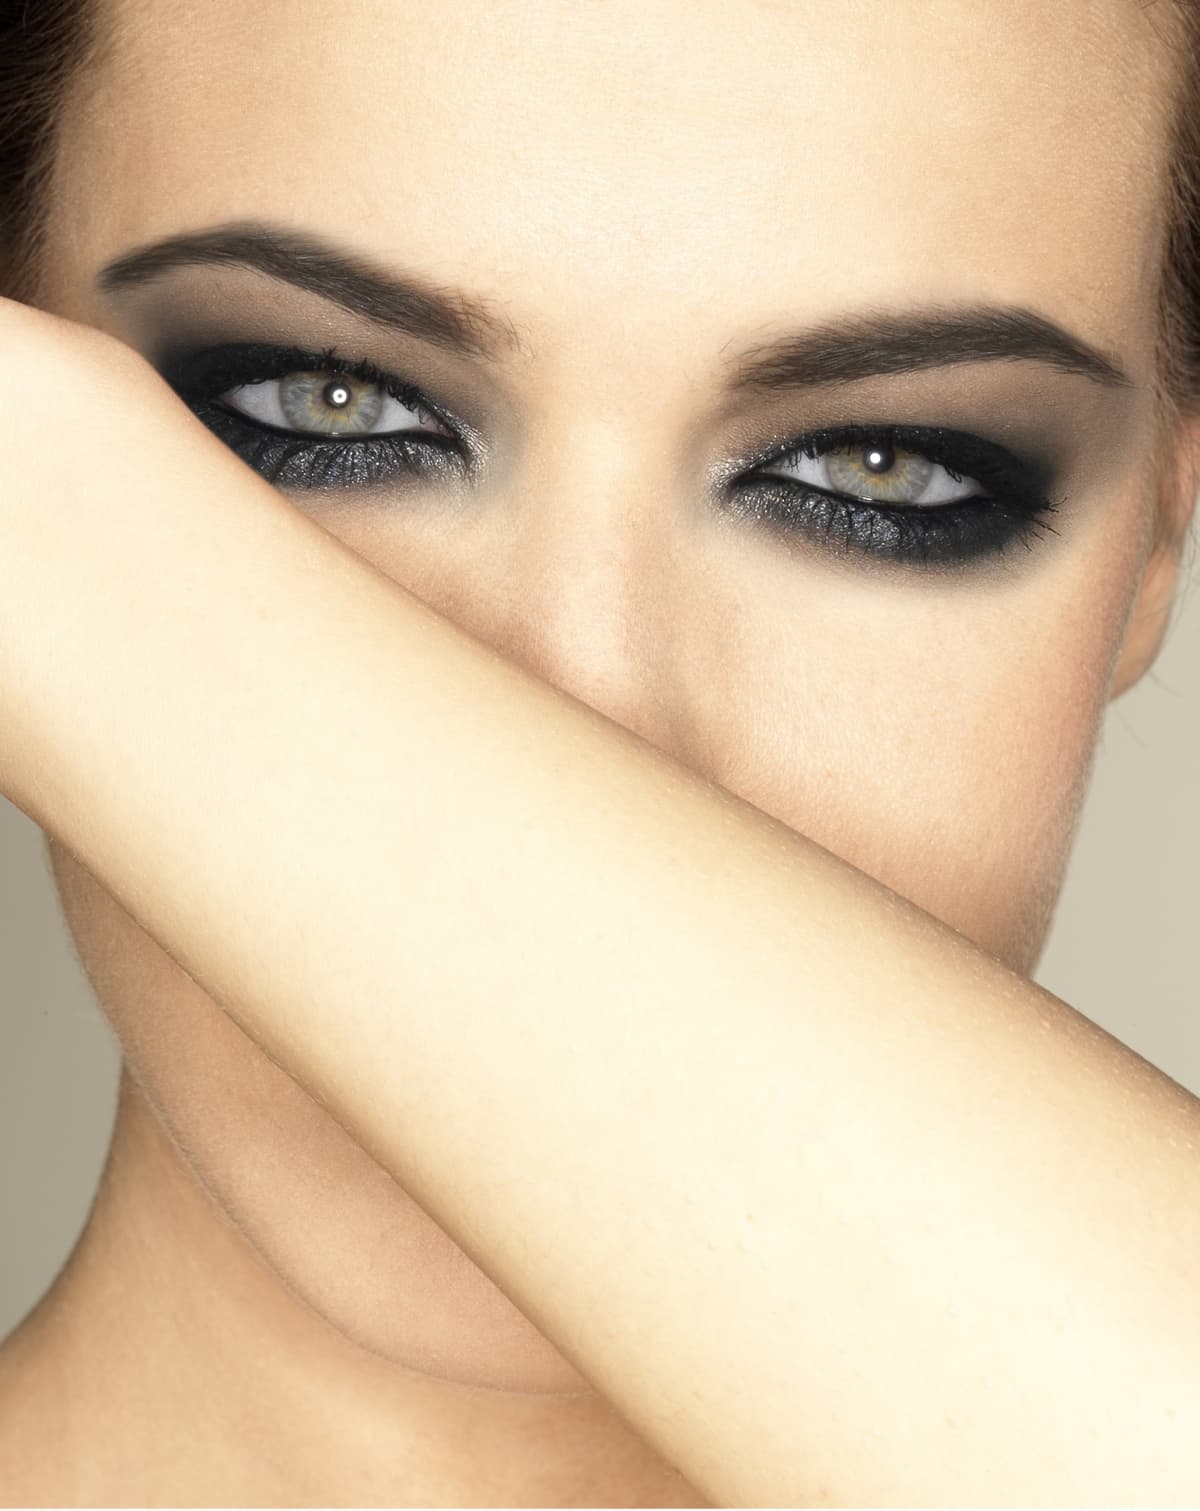 woman close-up with green eyes and black eyeshadow